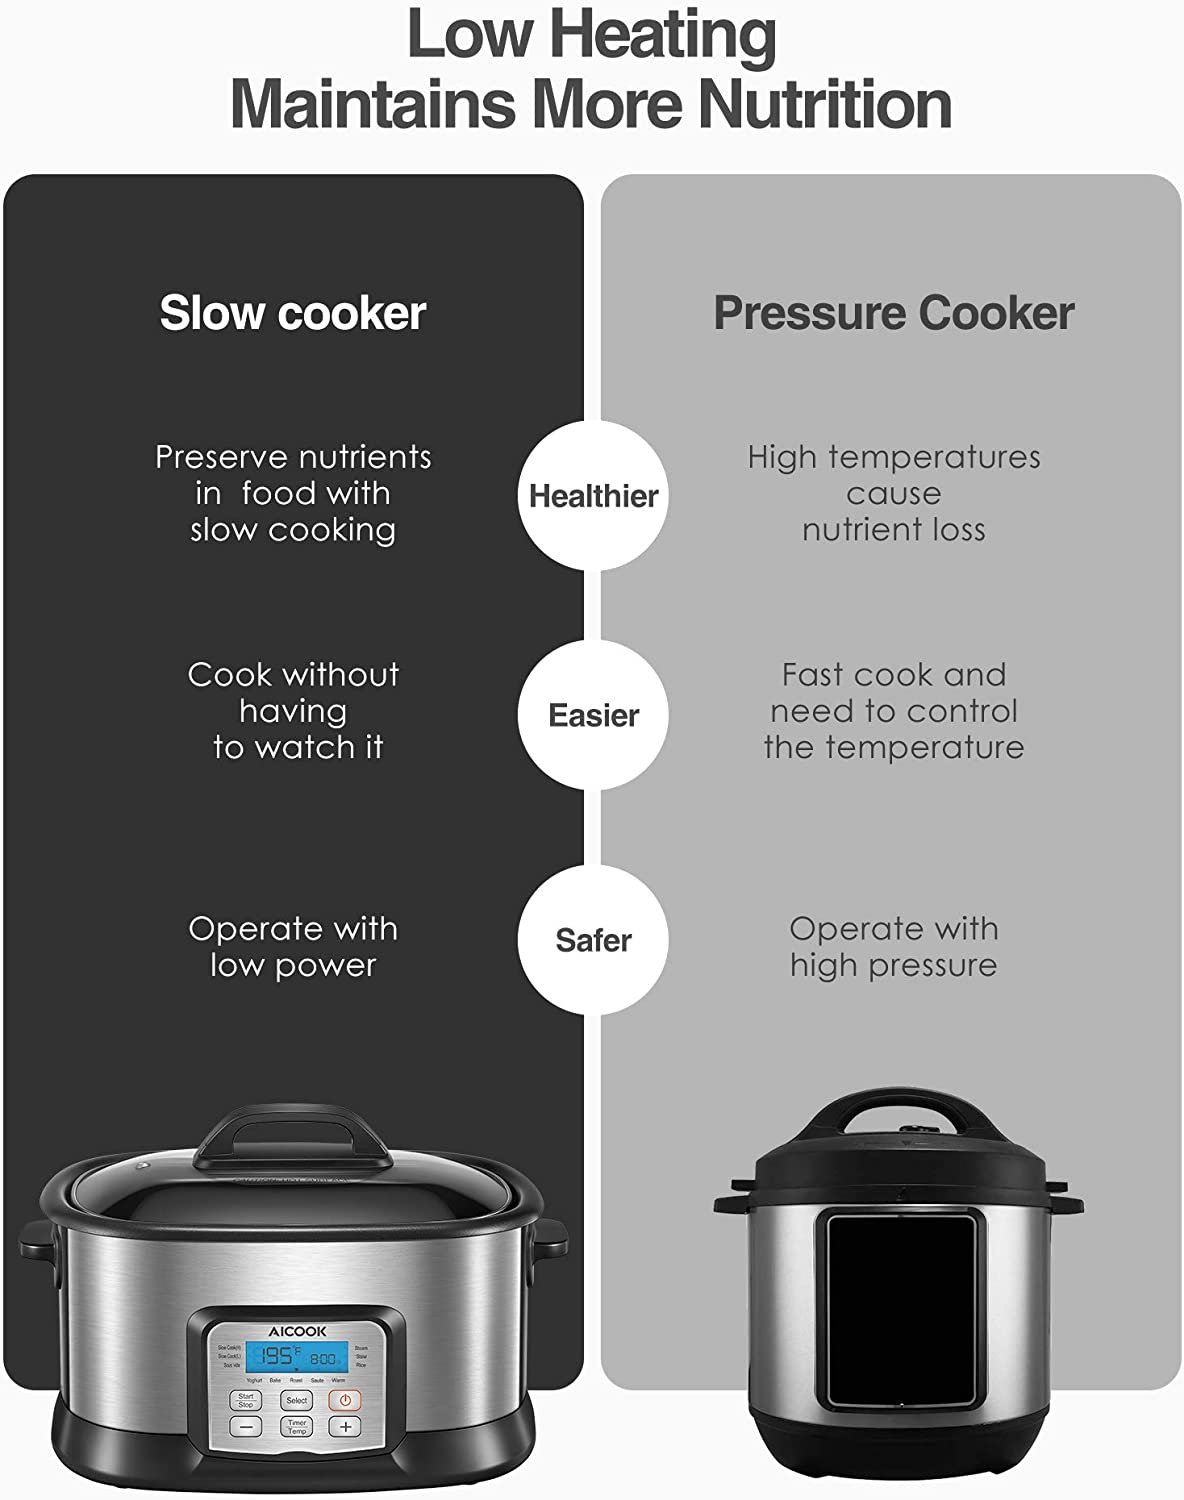 AICOOK |  Slow Cooker 6 Quart, Programmable Multi-Cooker 10-in-1 Multi-Use Steamer Food Warmer Yogurt Maker, 1500W, Low Heating Matains More Nutrition